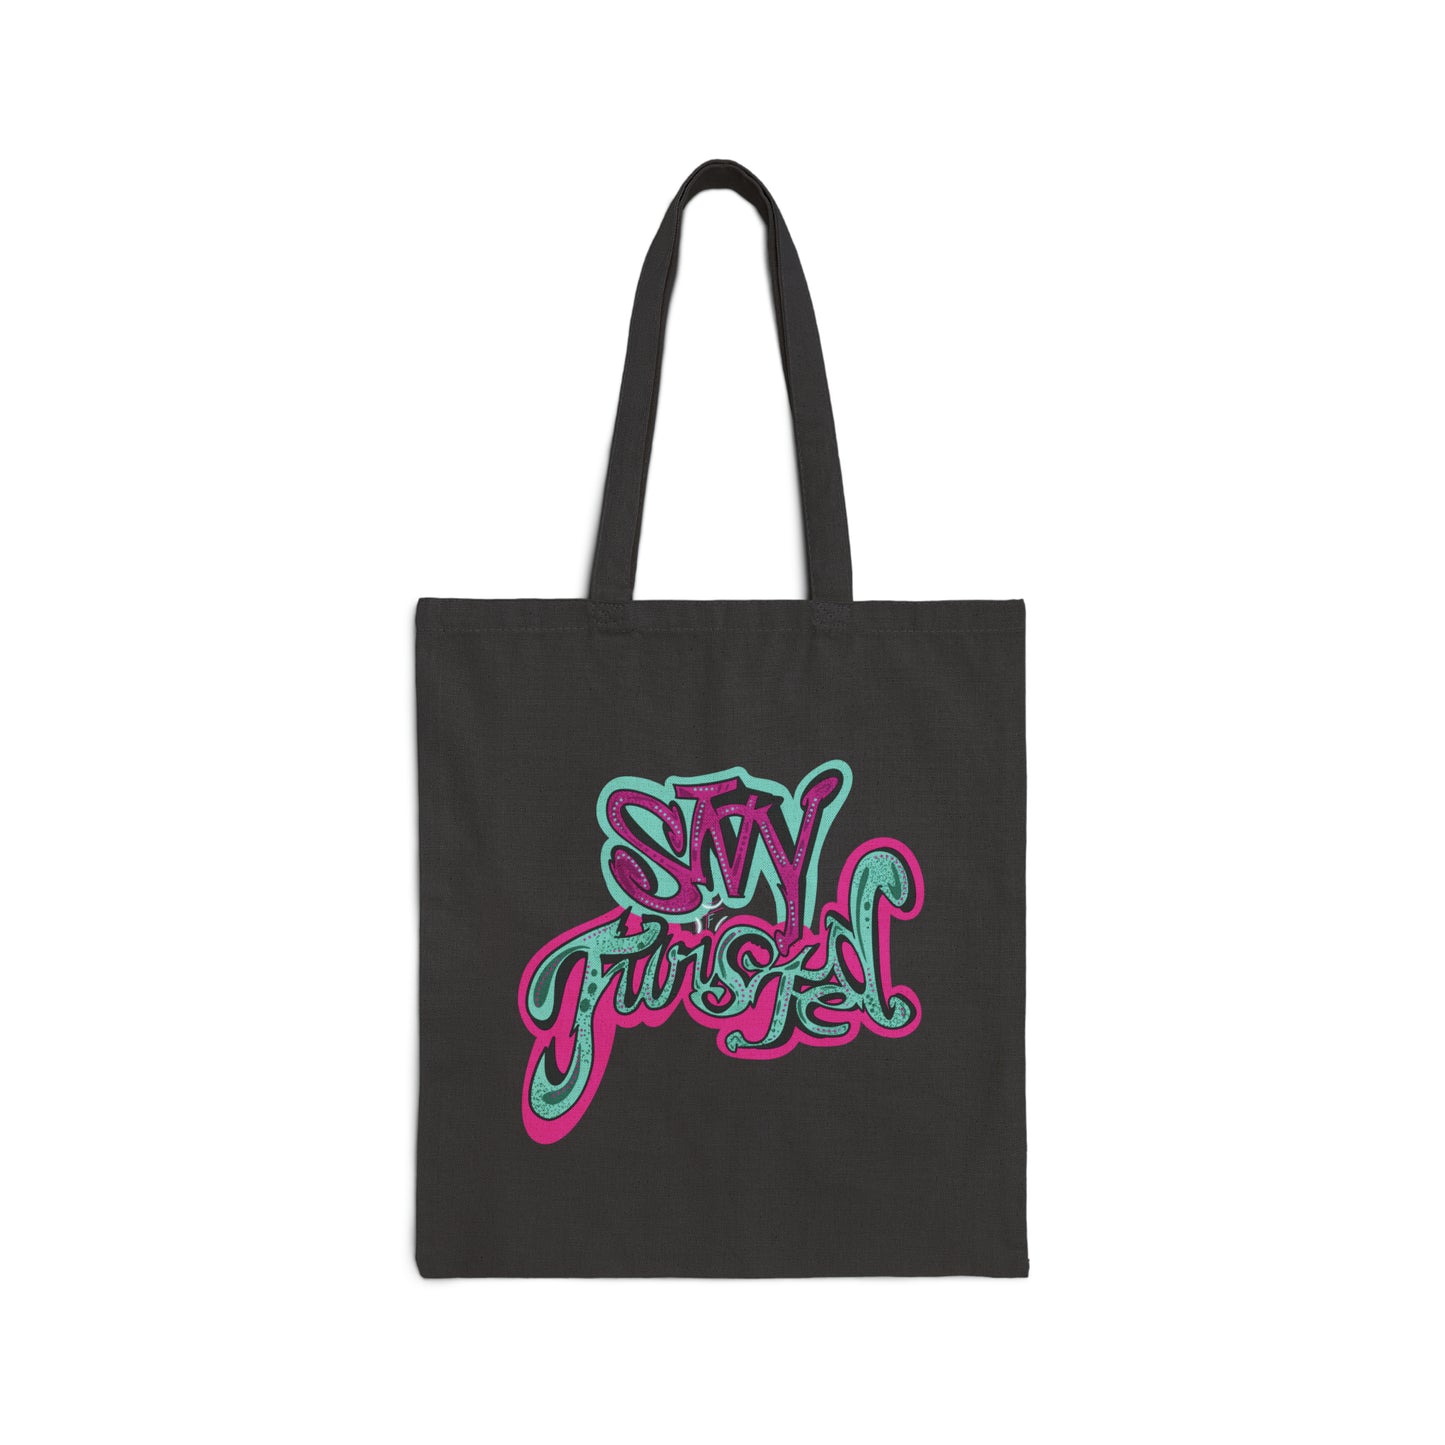 Stay Twisted Tote Bag